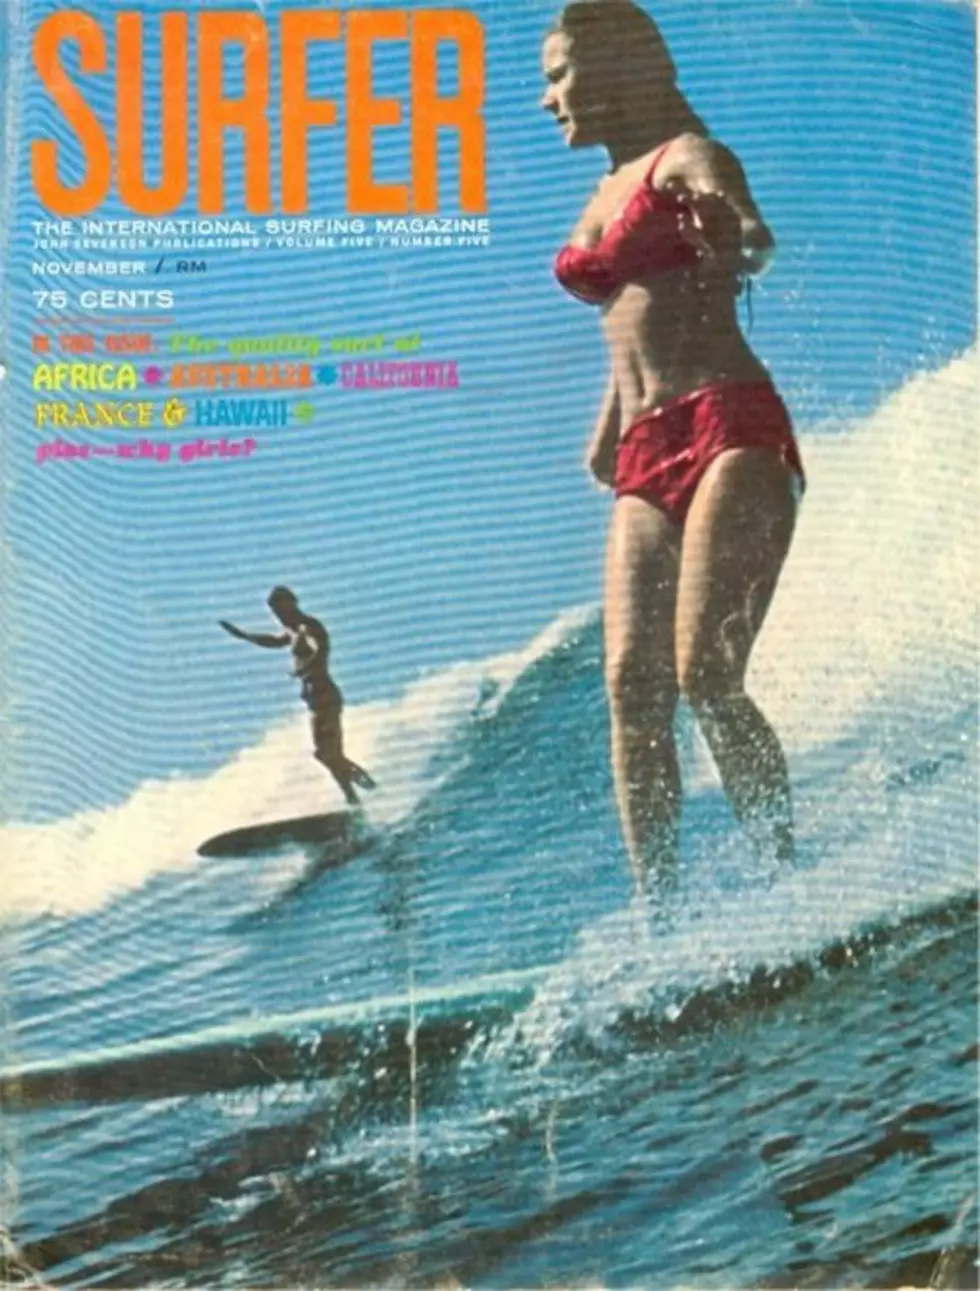 Still Corners takeover: old surf magazines